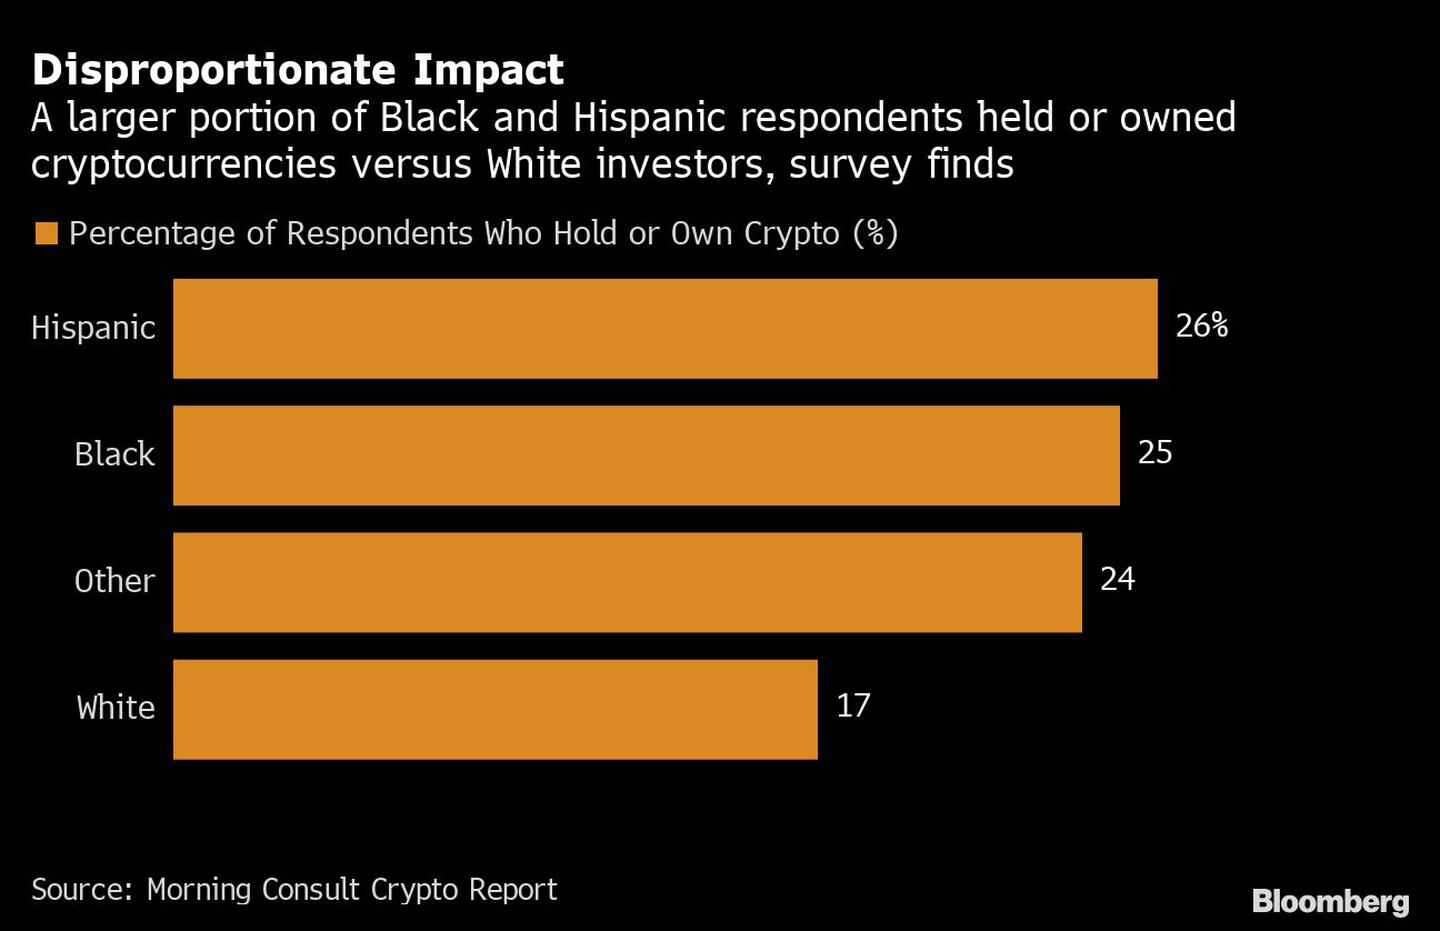 Disproportionate Impact | A larger portion of Black and Hispanic respondents held or owned cryptocurrencies versus White investors, survey findsdfd